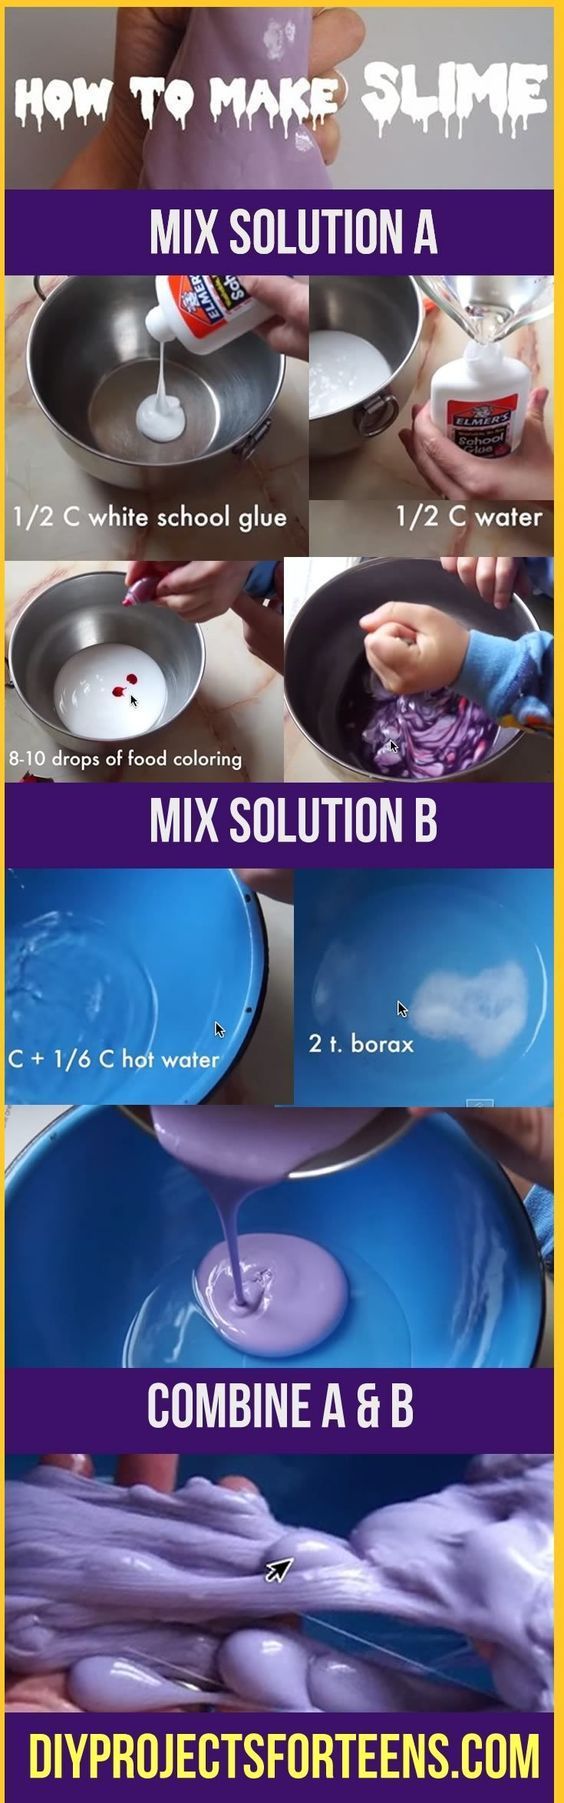 Fun DIY Projects | How To Make Slime Tutorial | Cool Crafts Ideas for Teens and Tweens: